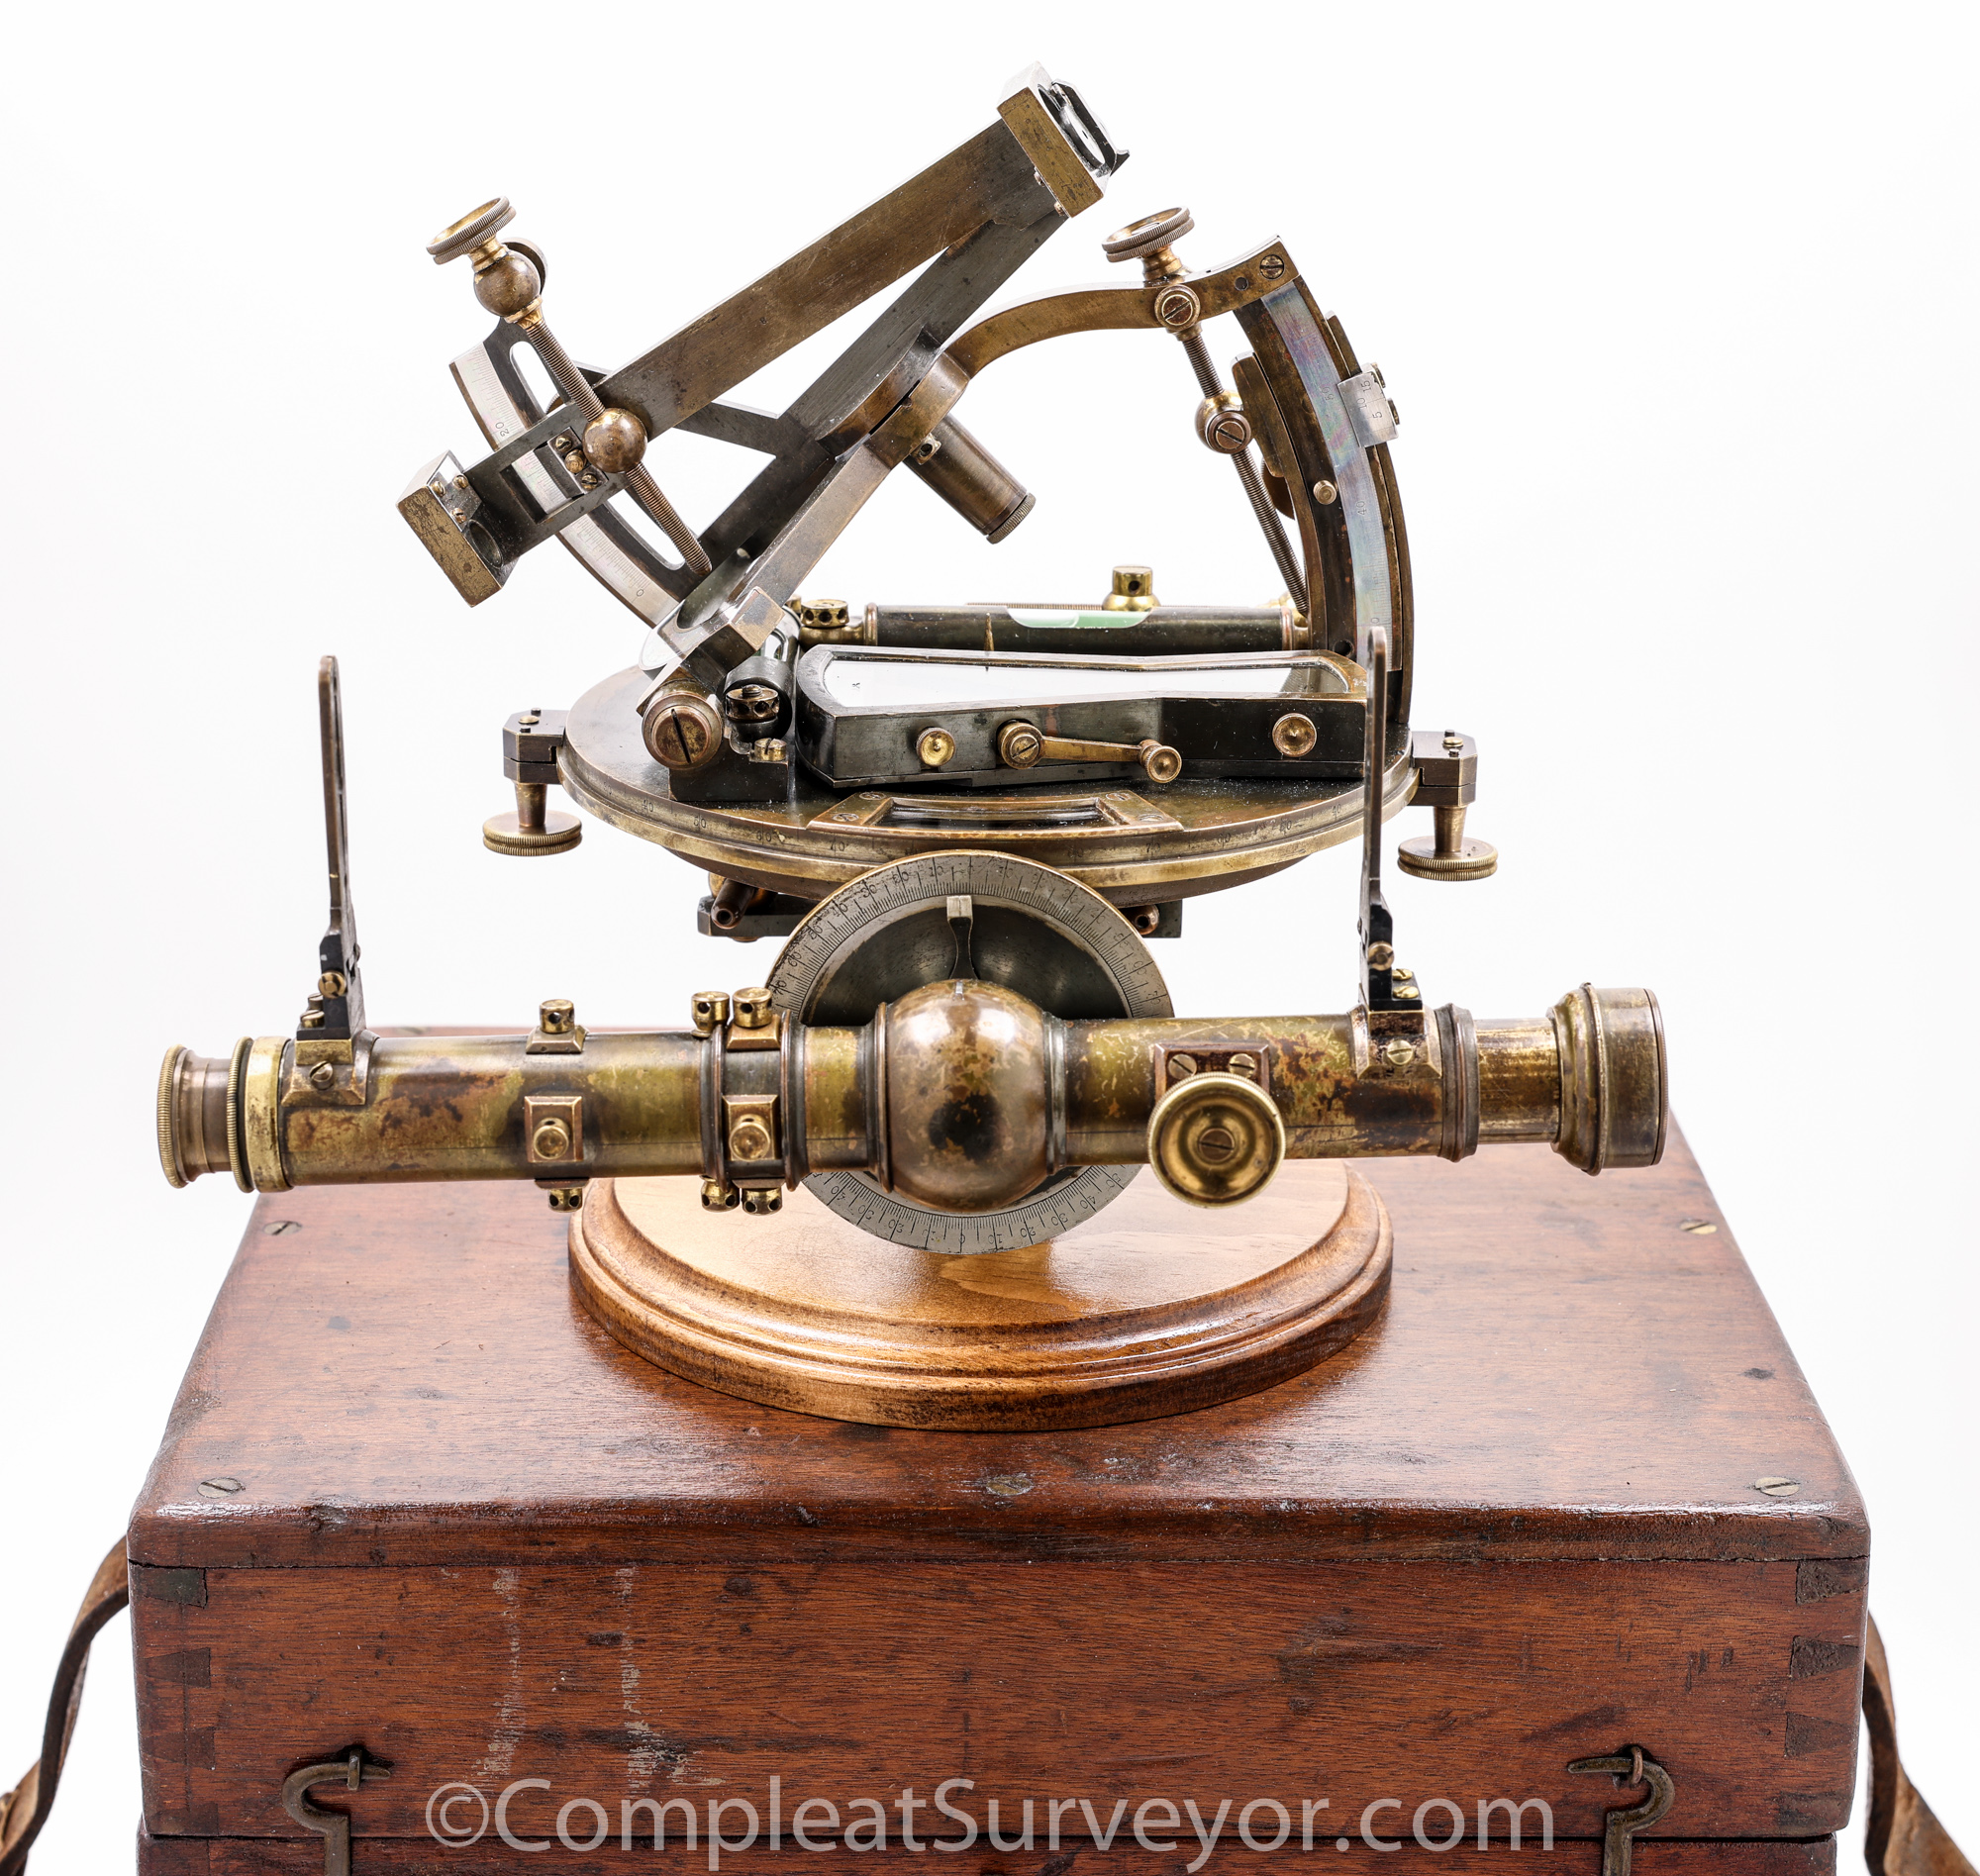 Gurley Solar Telescope Compass – One of Two Known